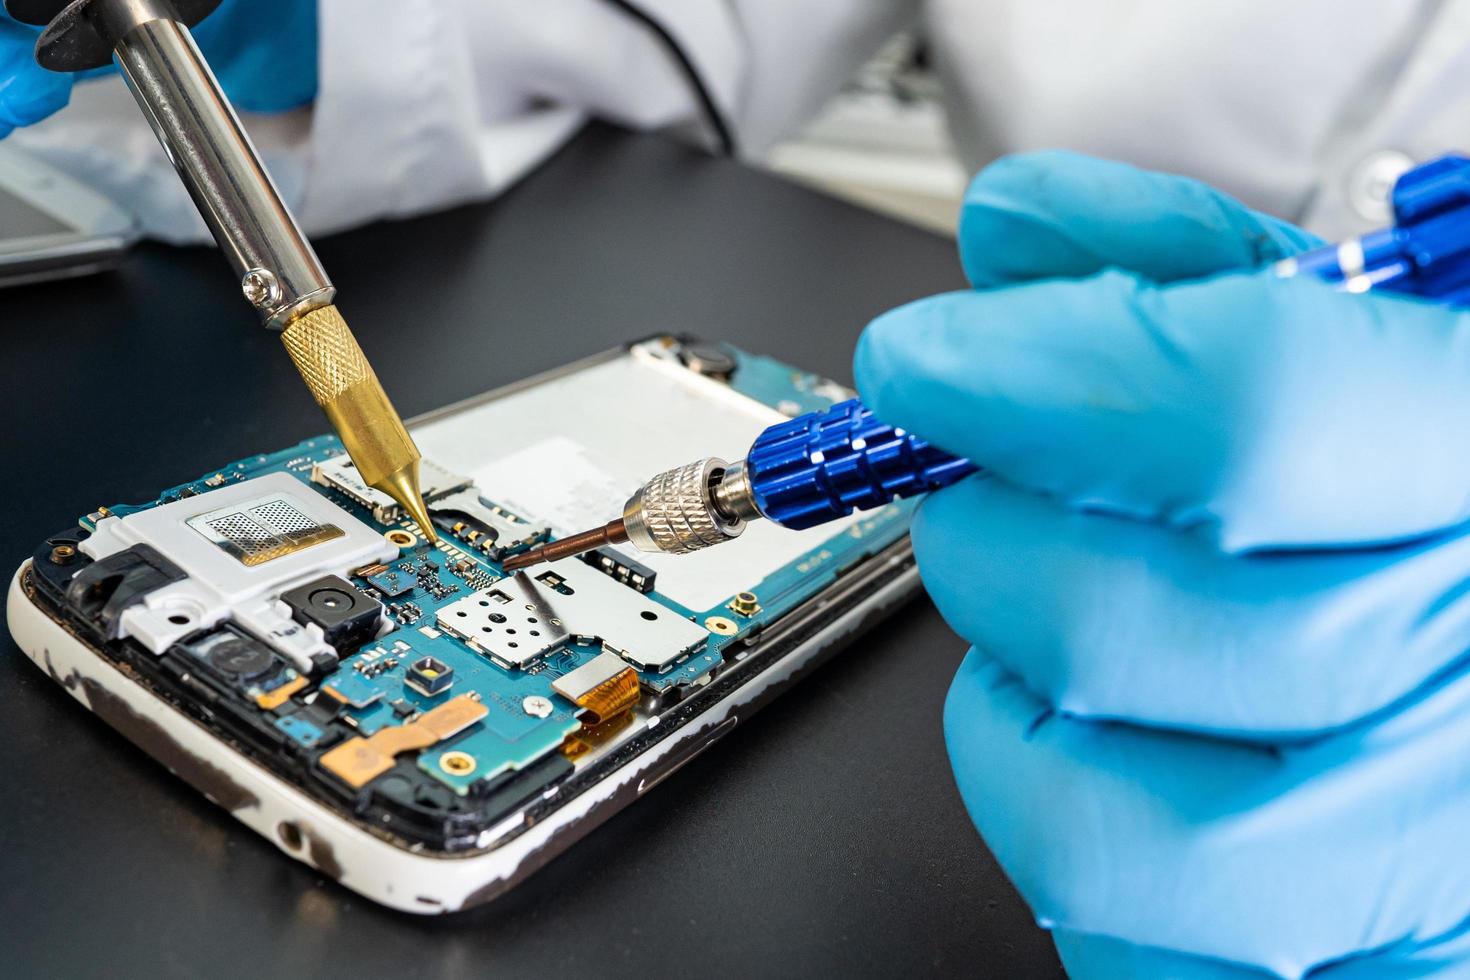 Technician repairing inside of mobile phone by soldering iron. Integrated Circuit. the concept of data, hardware, technology. photo